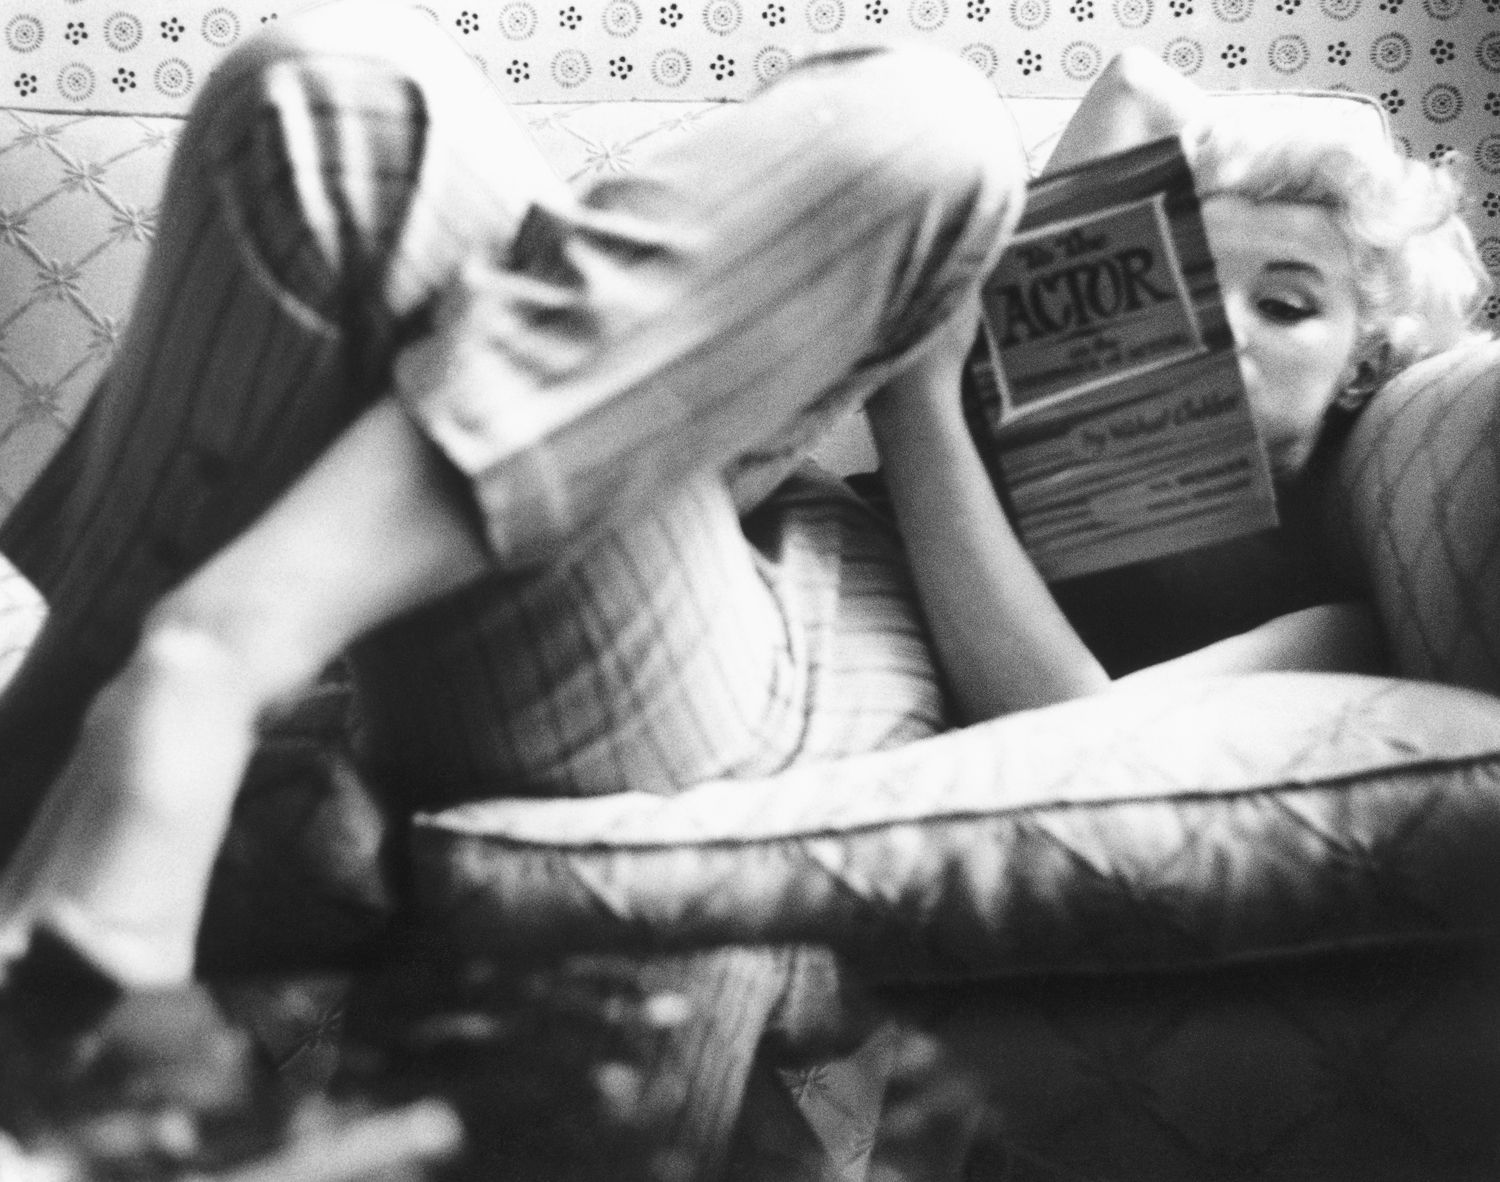 In a New York restaurant in 1955, Monroe immerses herself in a book while reclining on a cozy couch. While known for her dumb-blonde roles, she was in fact very well-read.